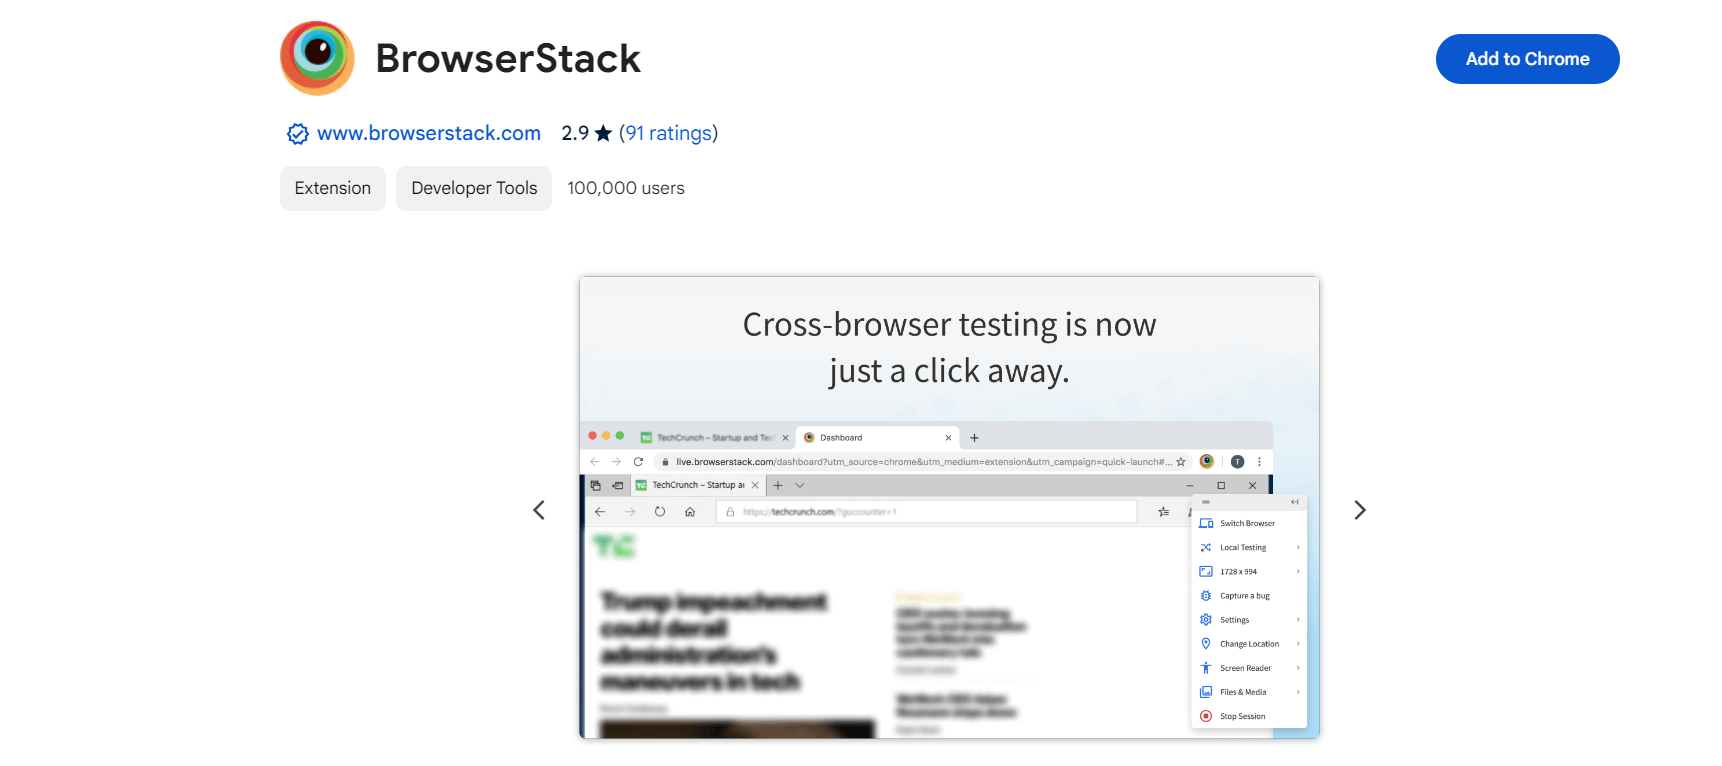 BrowserStack’s Google Chrome extension.